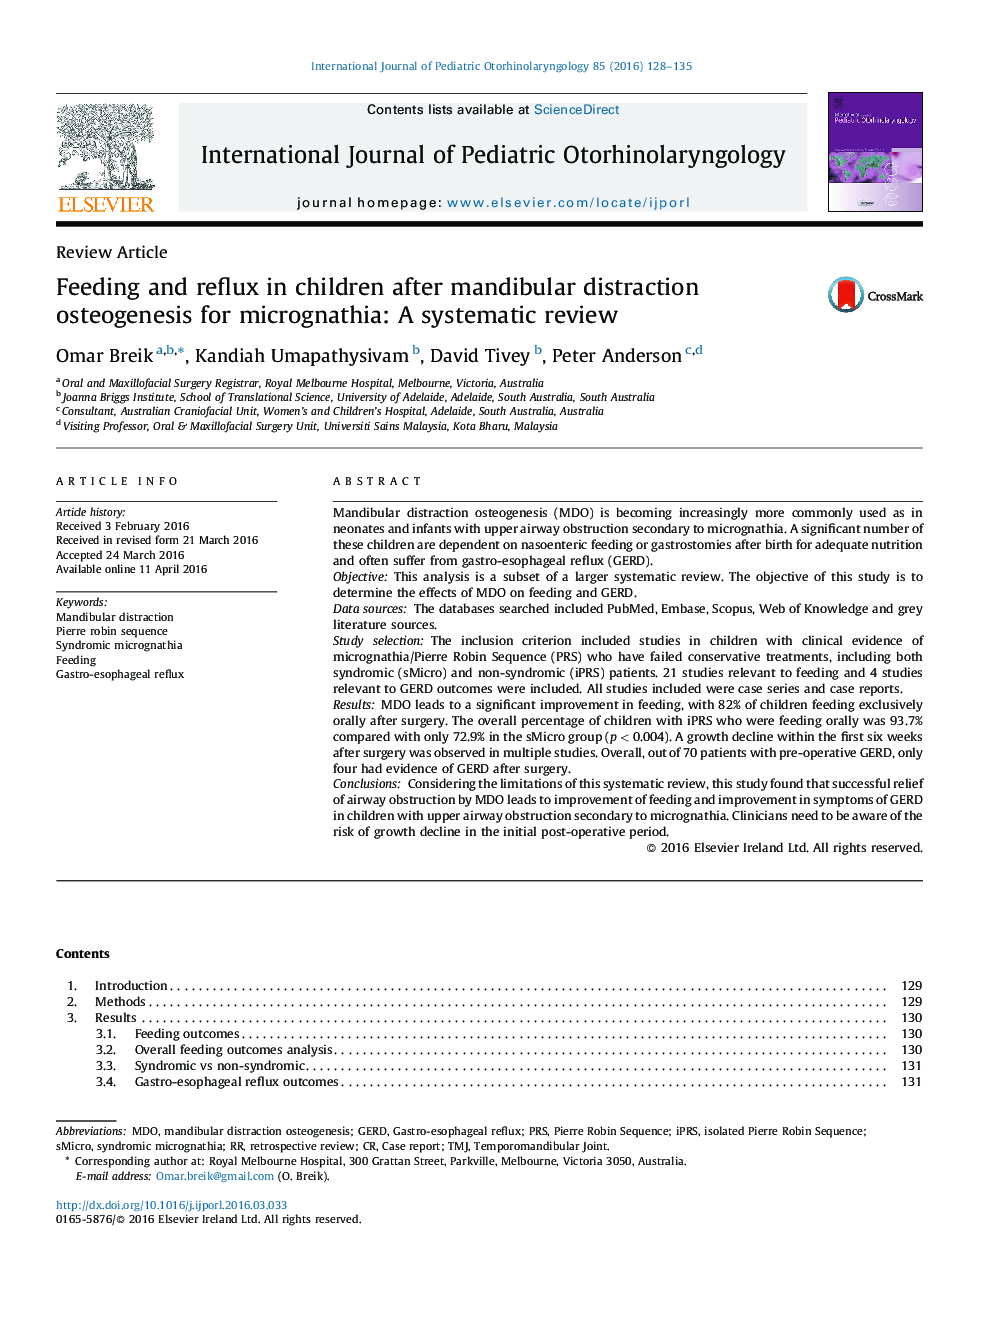 Feeding and reflux in children after mandibular distraction osteogenesis for micrognathia: A systematic review